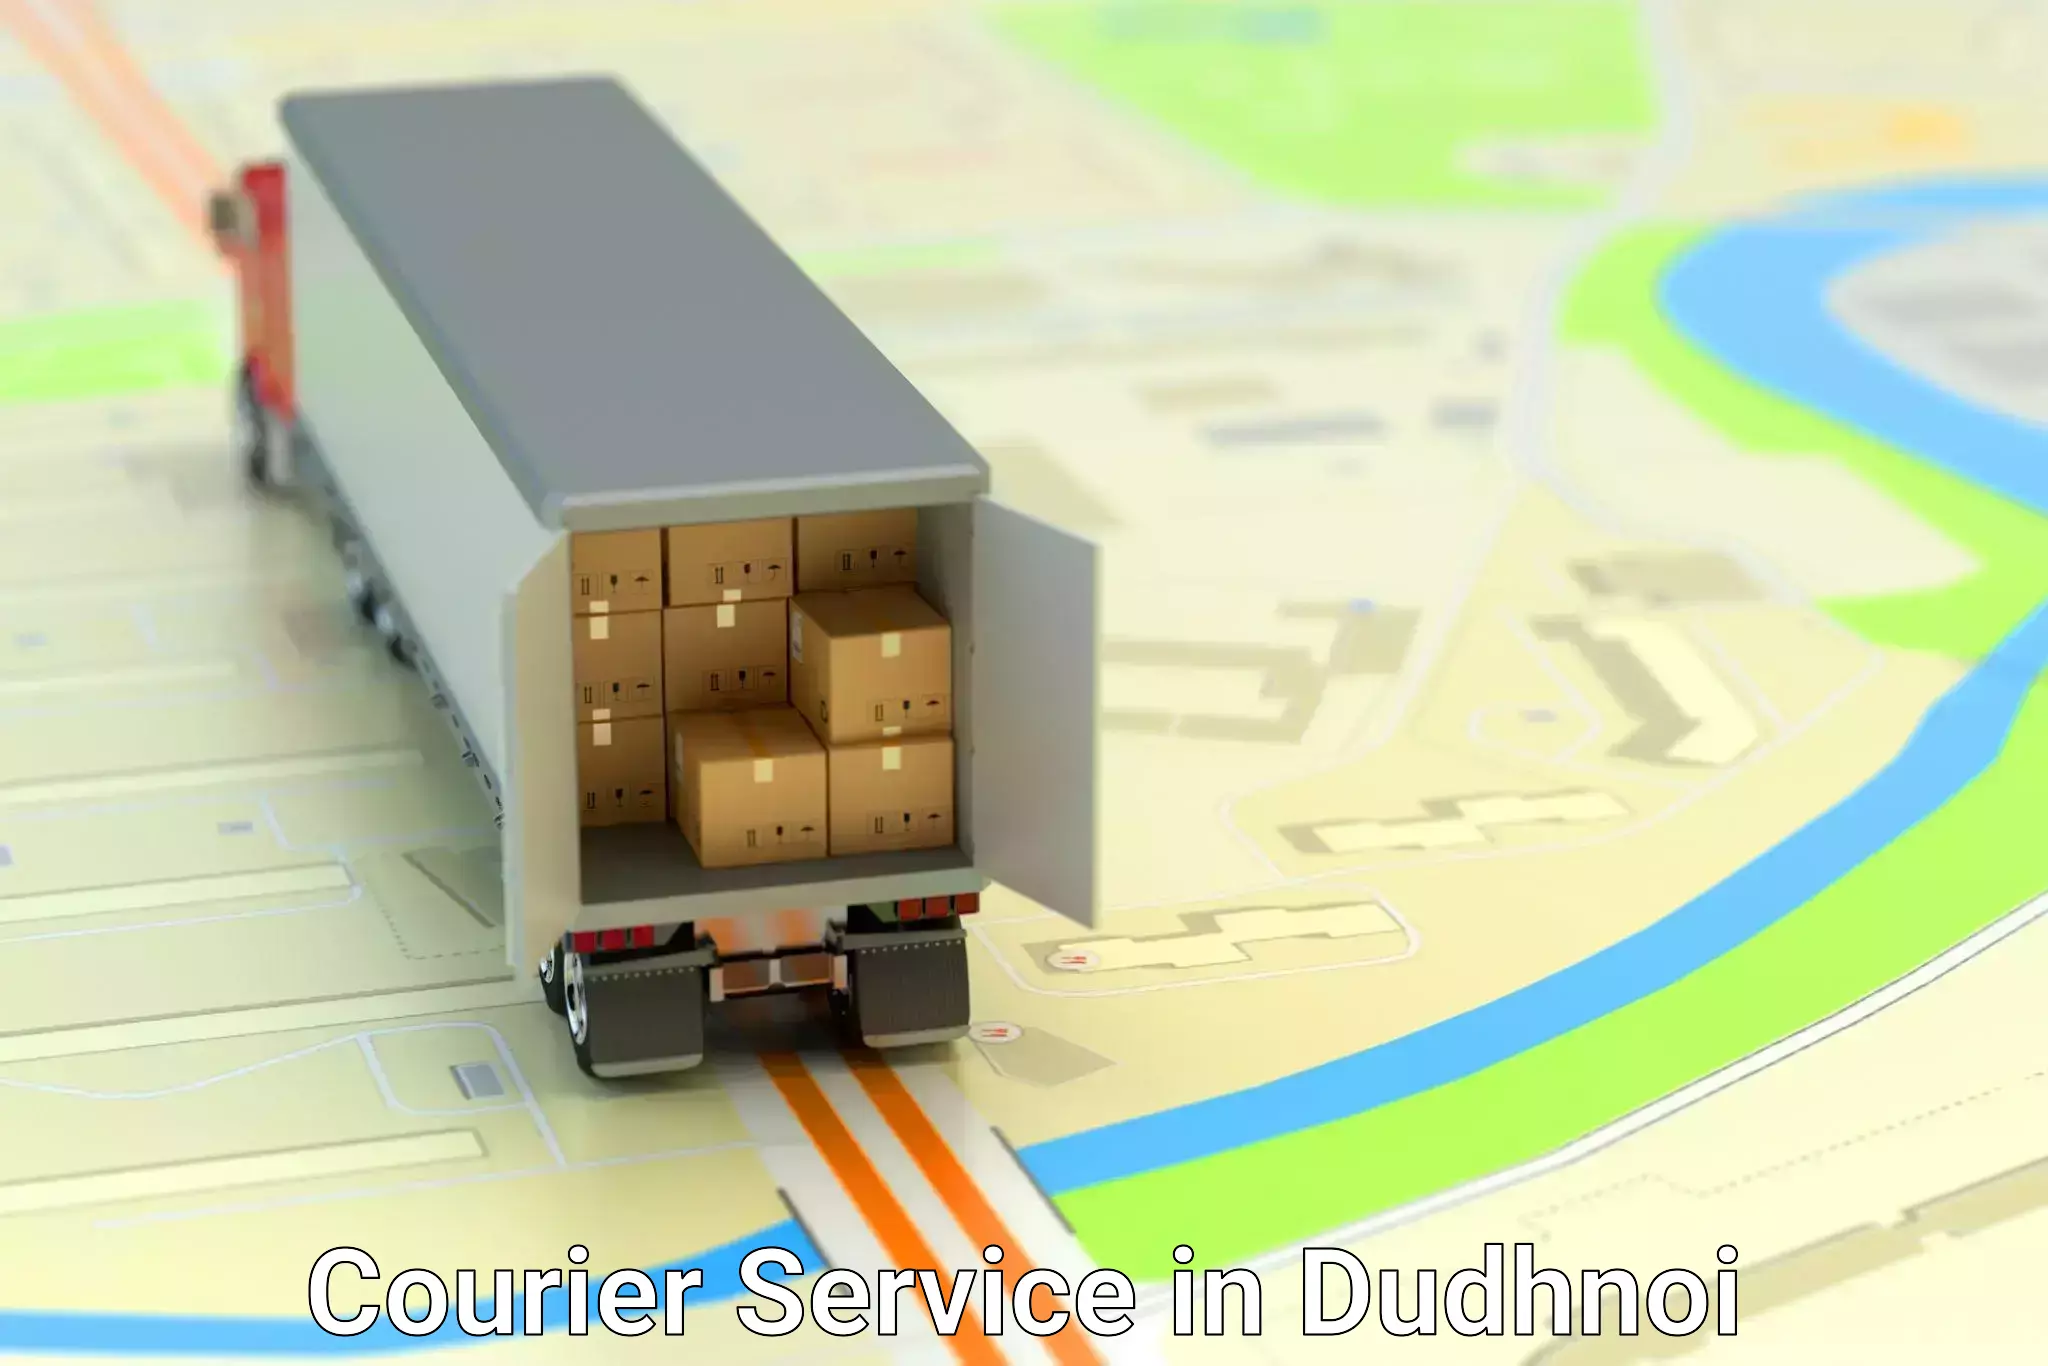 Streamlined shipping process in Dudhnoi